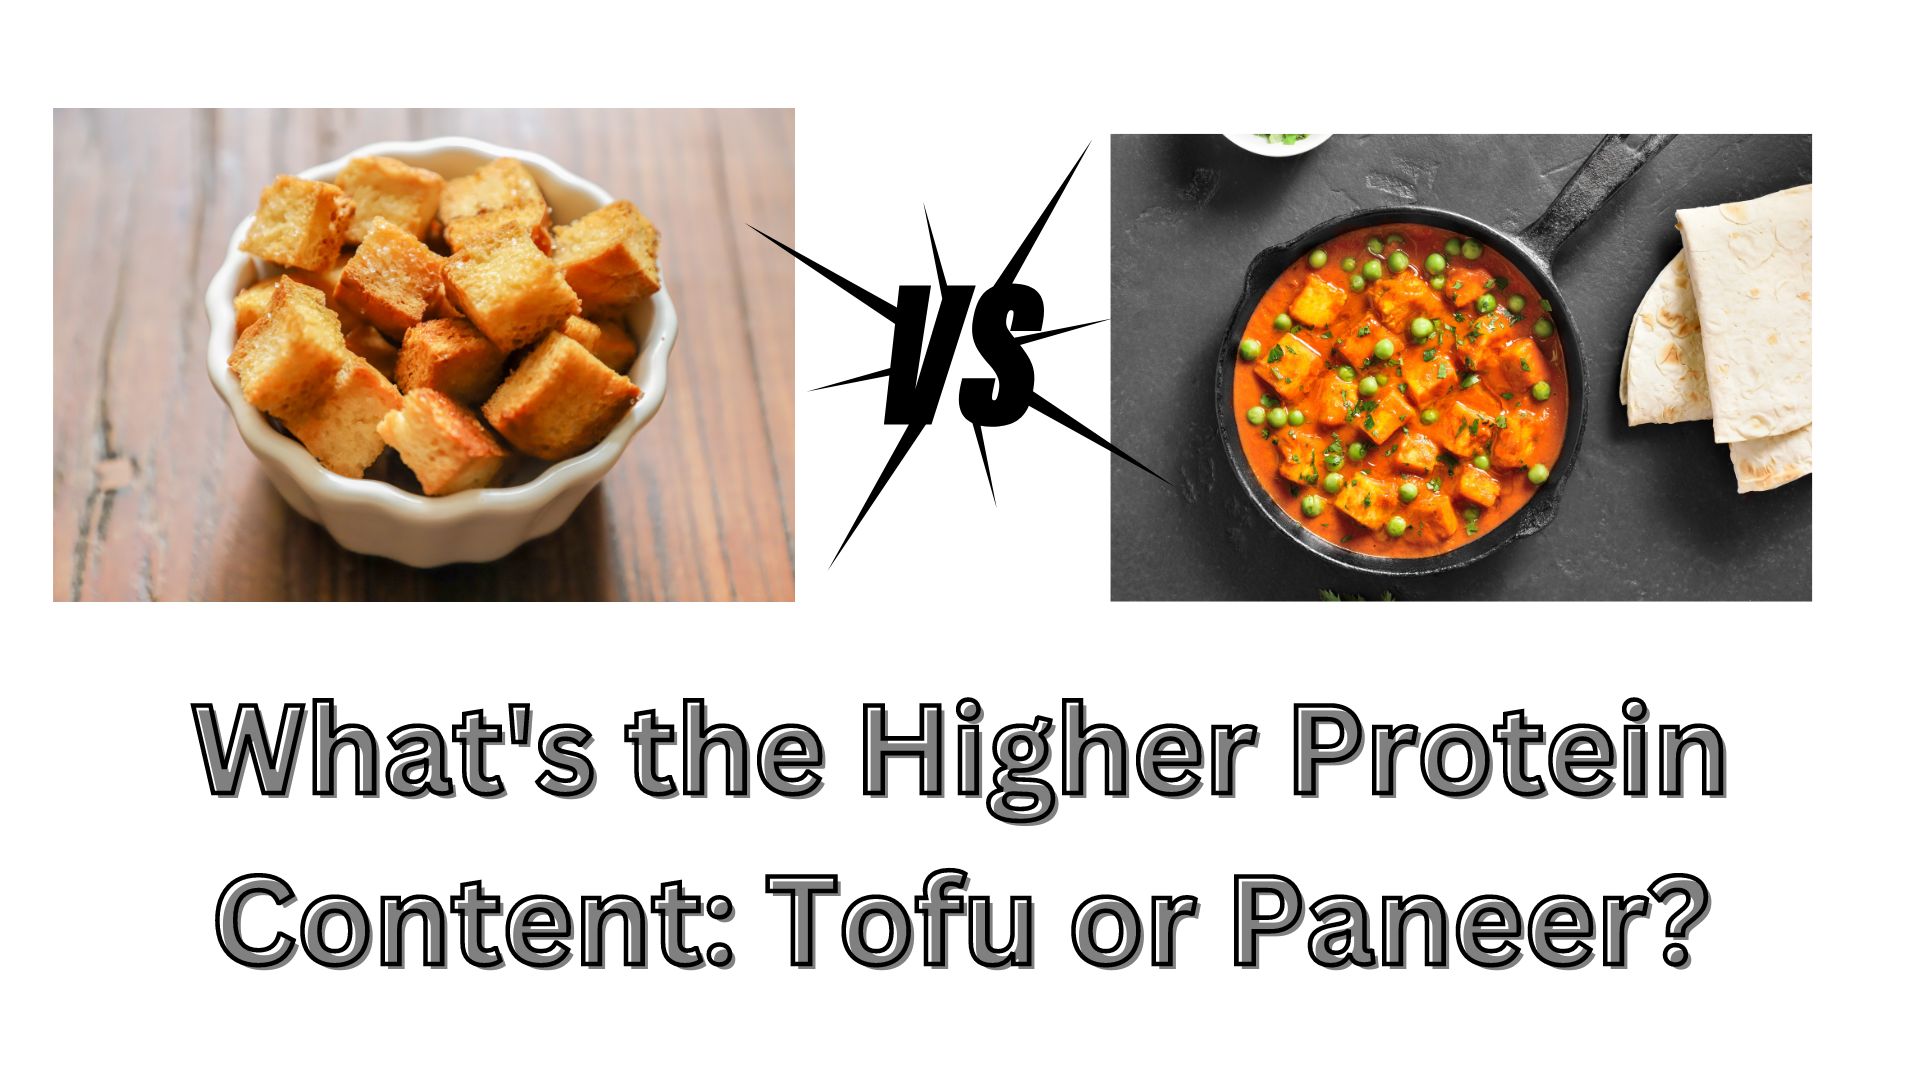 What's the Higher Protein Content: Tofu or Paneer?